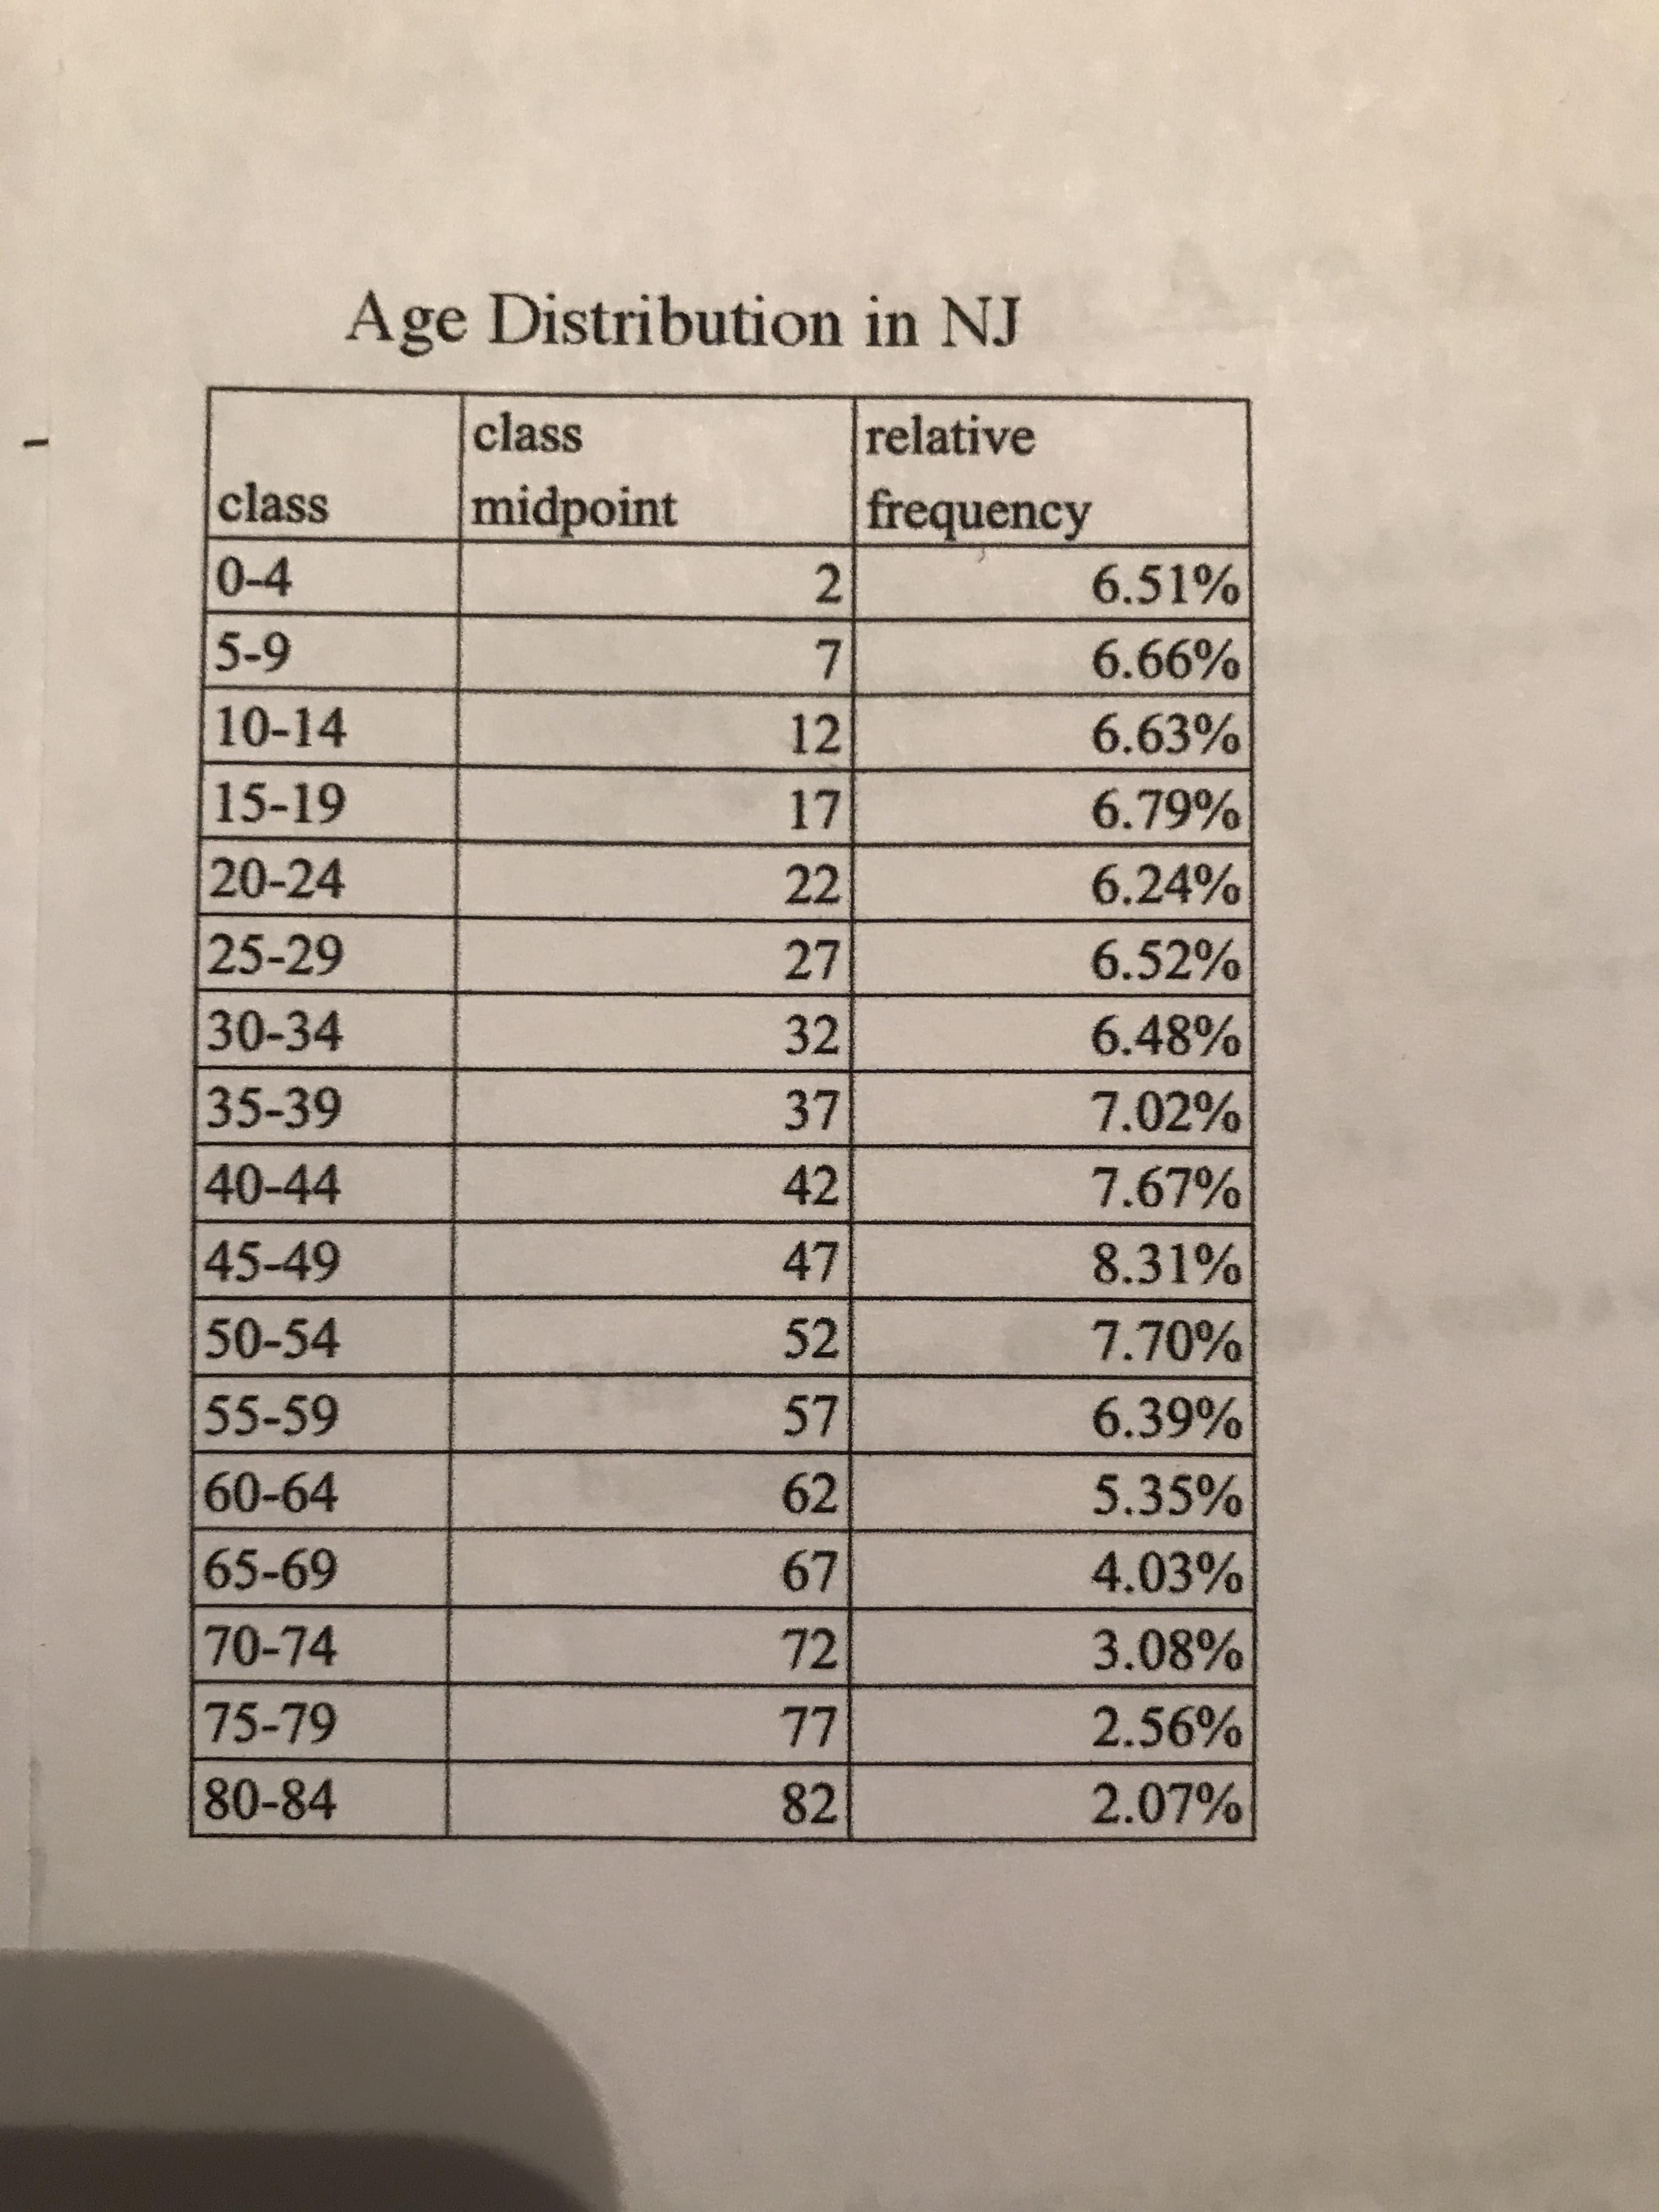 Age Distribution in NJ
relative
class
midpoint
class
frequency
0-4
6.51%
5-9
6.66%
10-14
6.63%
12
15-19
6.79%
17
20-24
6.24%
22
25-29
27
6.52%
30-34
32
6.48%
35-39
37
7.02%
40-44
42
7.67%
47
45-49
8.31%
50-54
52
7.70%
57
55-59
6.39%
60-64
62
5.35%
65-69
67
4.03%
70-74
72
3.08%
75-79
77
2.56%
80-84
82
2.07%
2.
